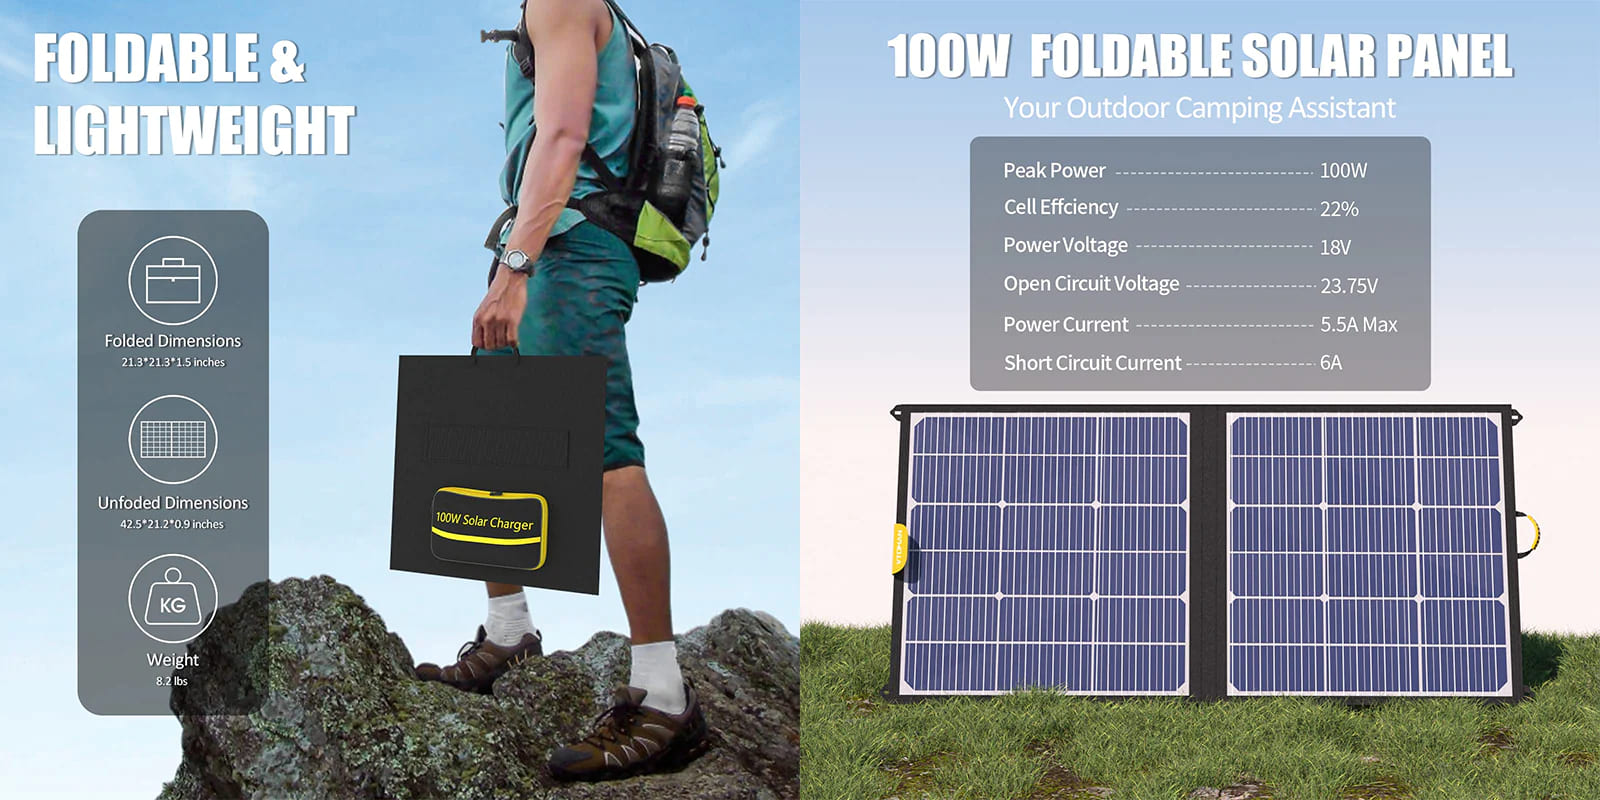 PORTABLE AND FOLDABLE Solar Panels